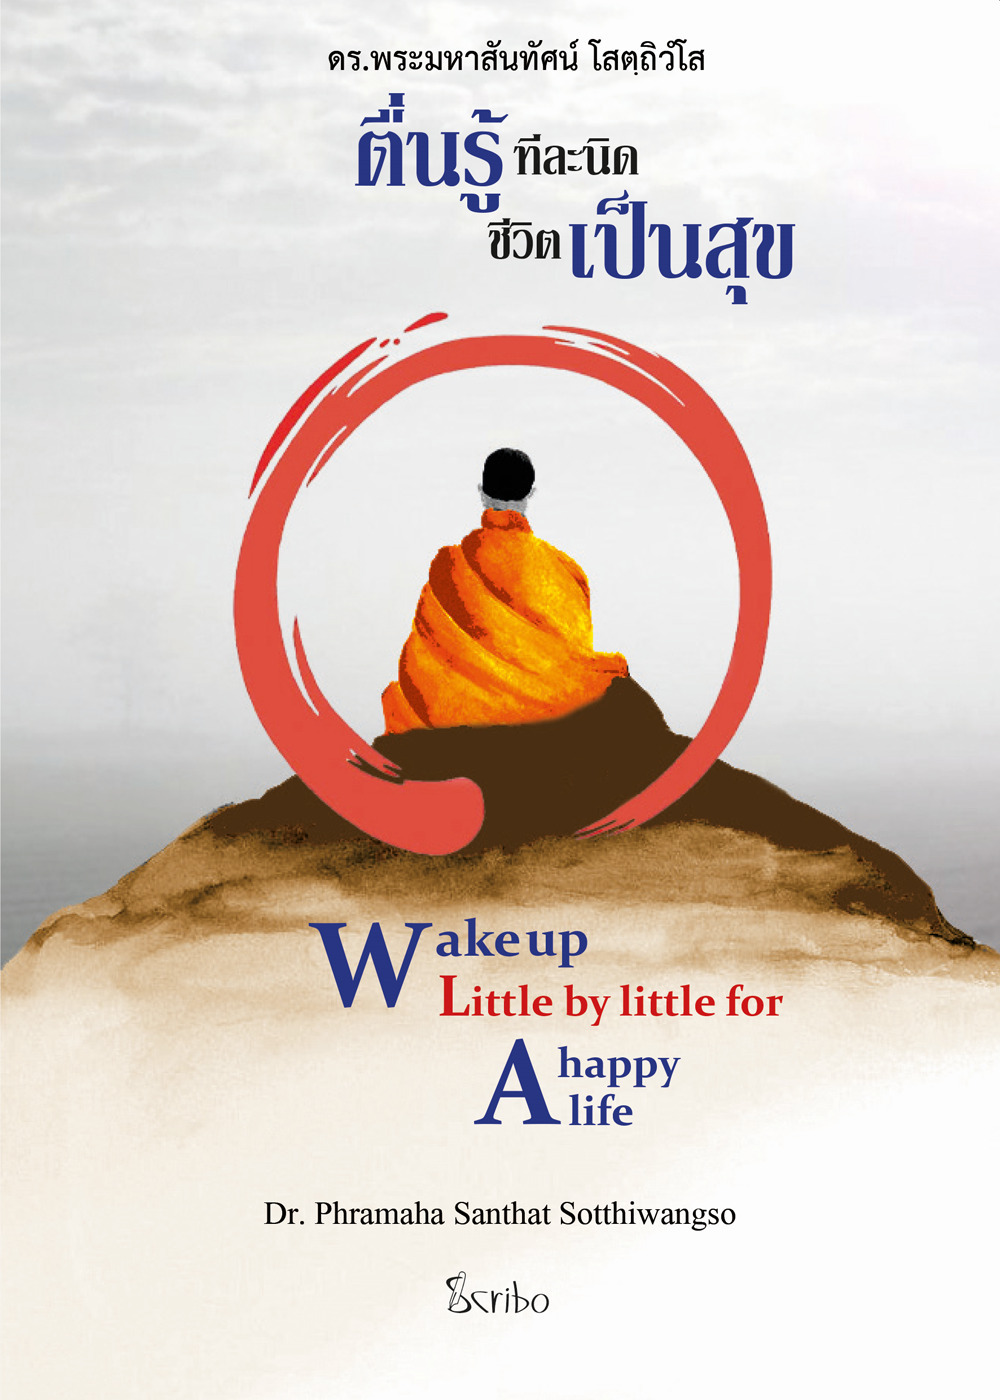 Wake up little by little for a happy life. Ediz. inglese e thailandese